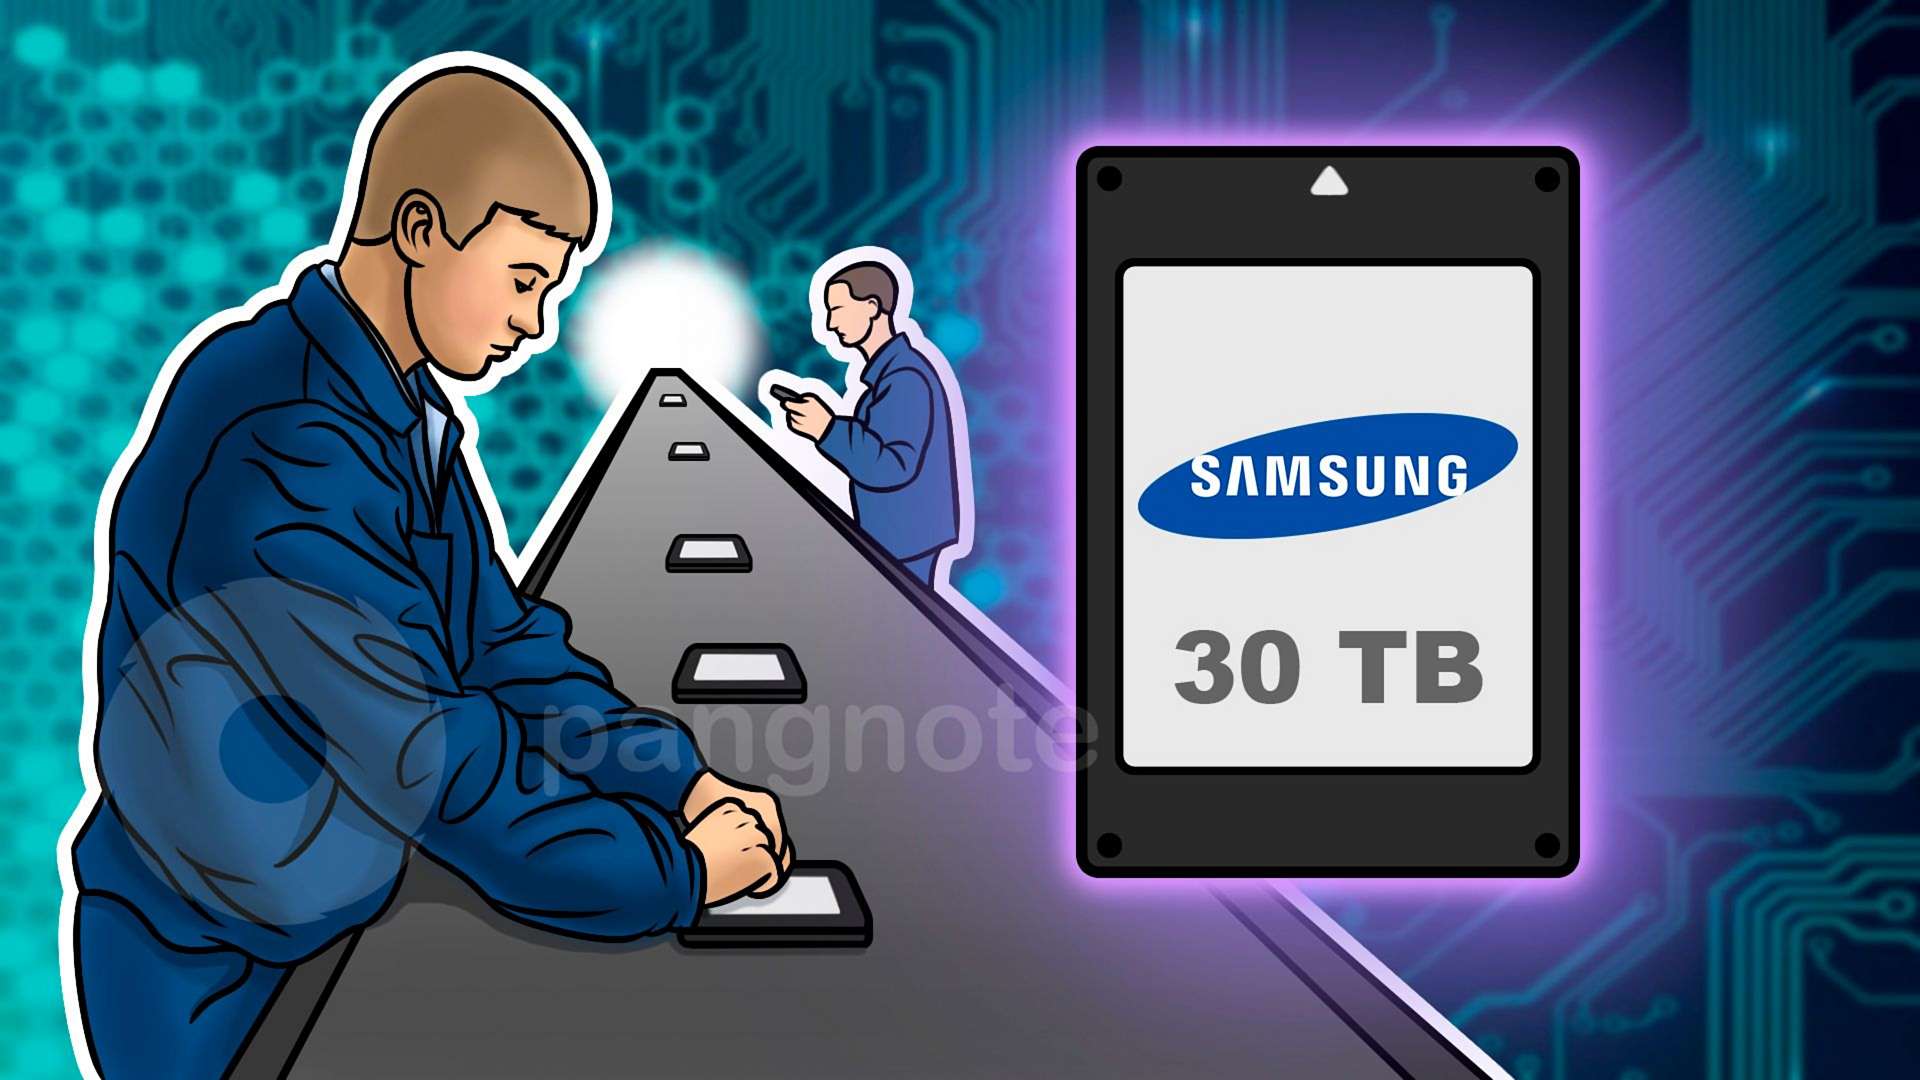 Samsung launched mass production of corporate 30TB SSD